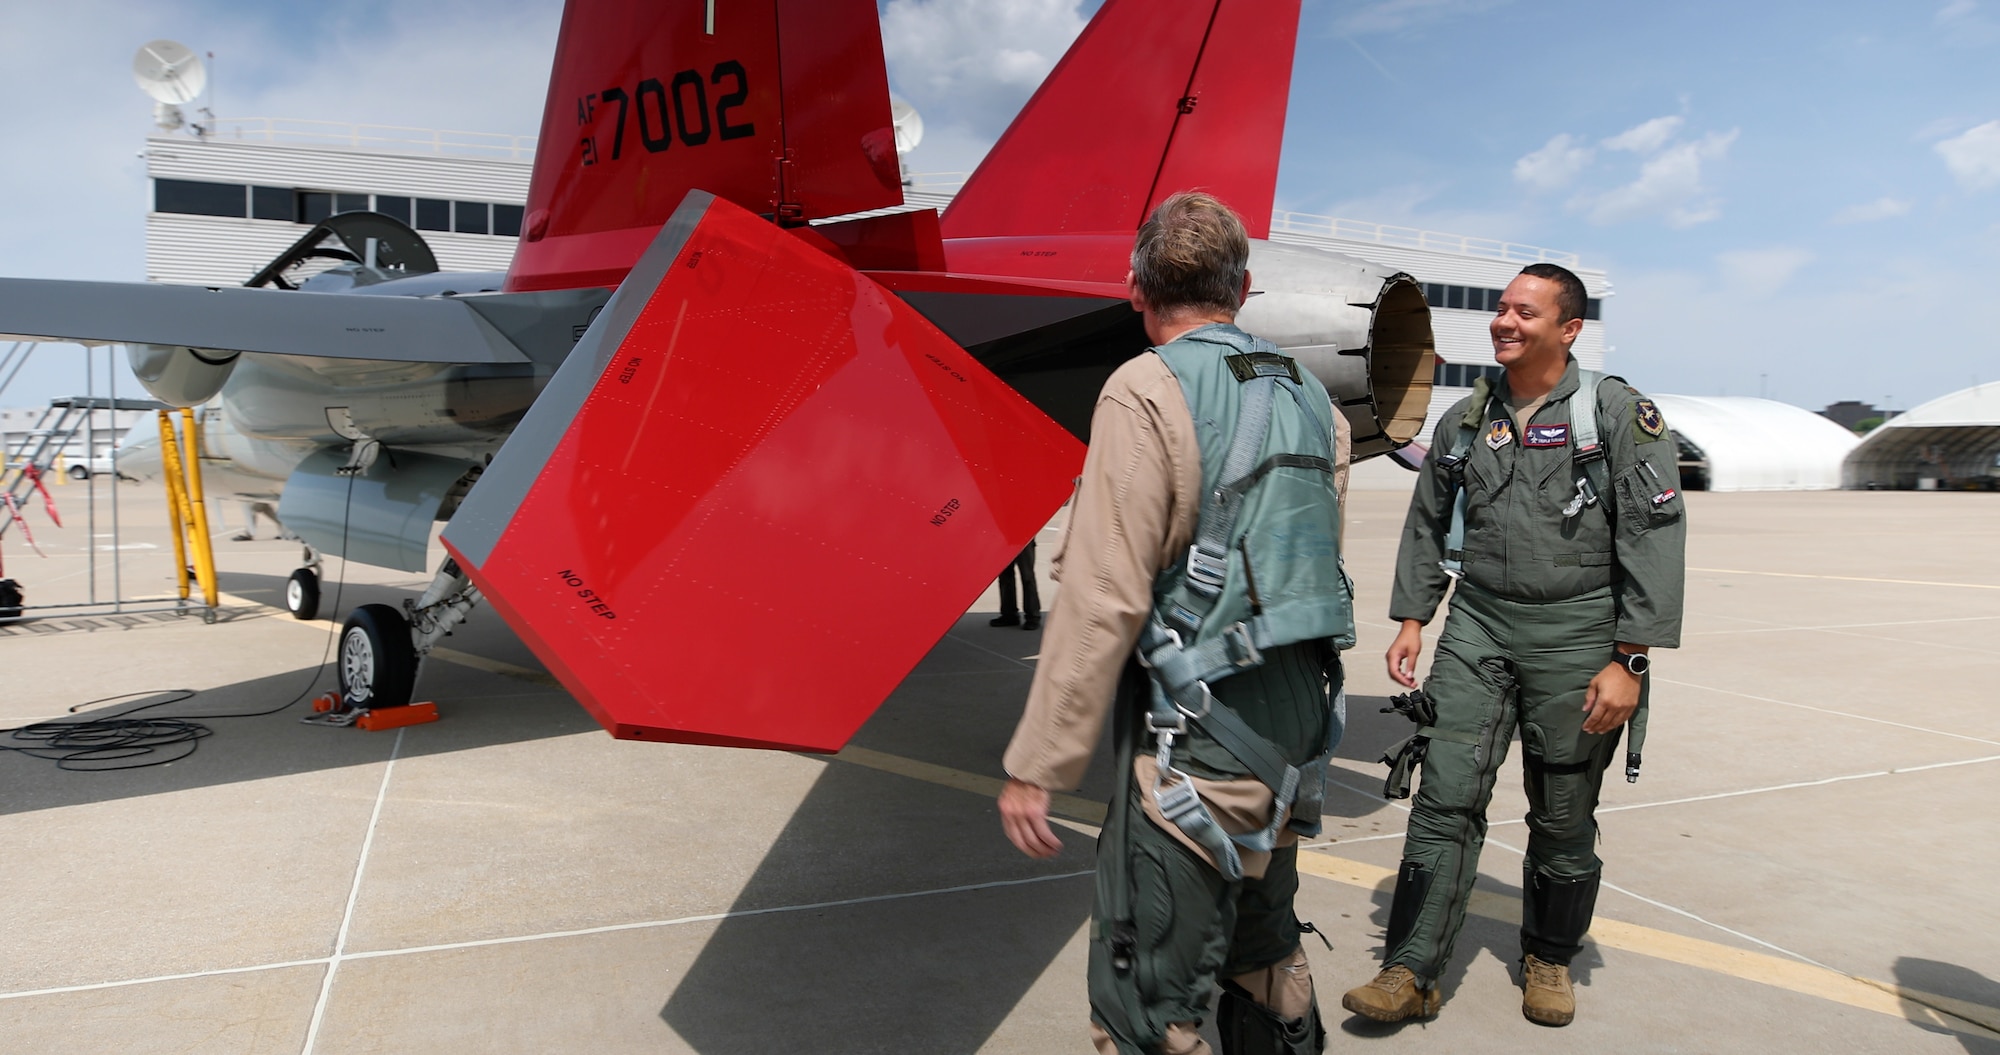 Maj. Bryce Turner, 416th Flight Test Squadron, conducts a walk around of a T-7A Red Hawk at the Boeing aircraft delivery center in St. Louis, Missouri, June 15. Turner became the first Air Force pilot to fly the T-7A Red Hawk, following a test flight at the Boeing aircraft delivery center in St. Louis, Missouri, June 28.